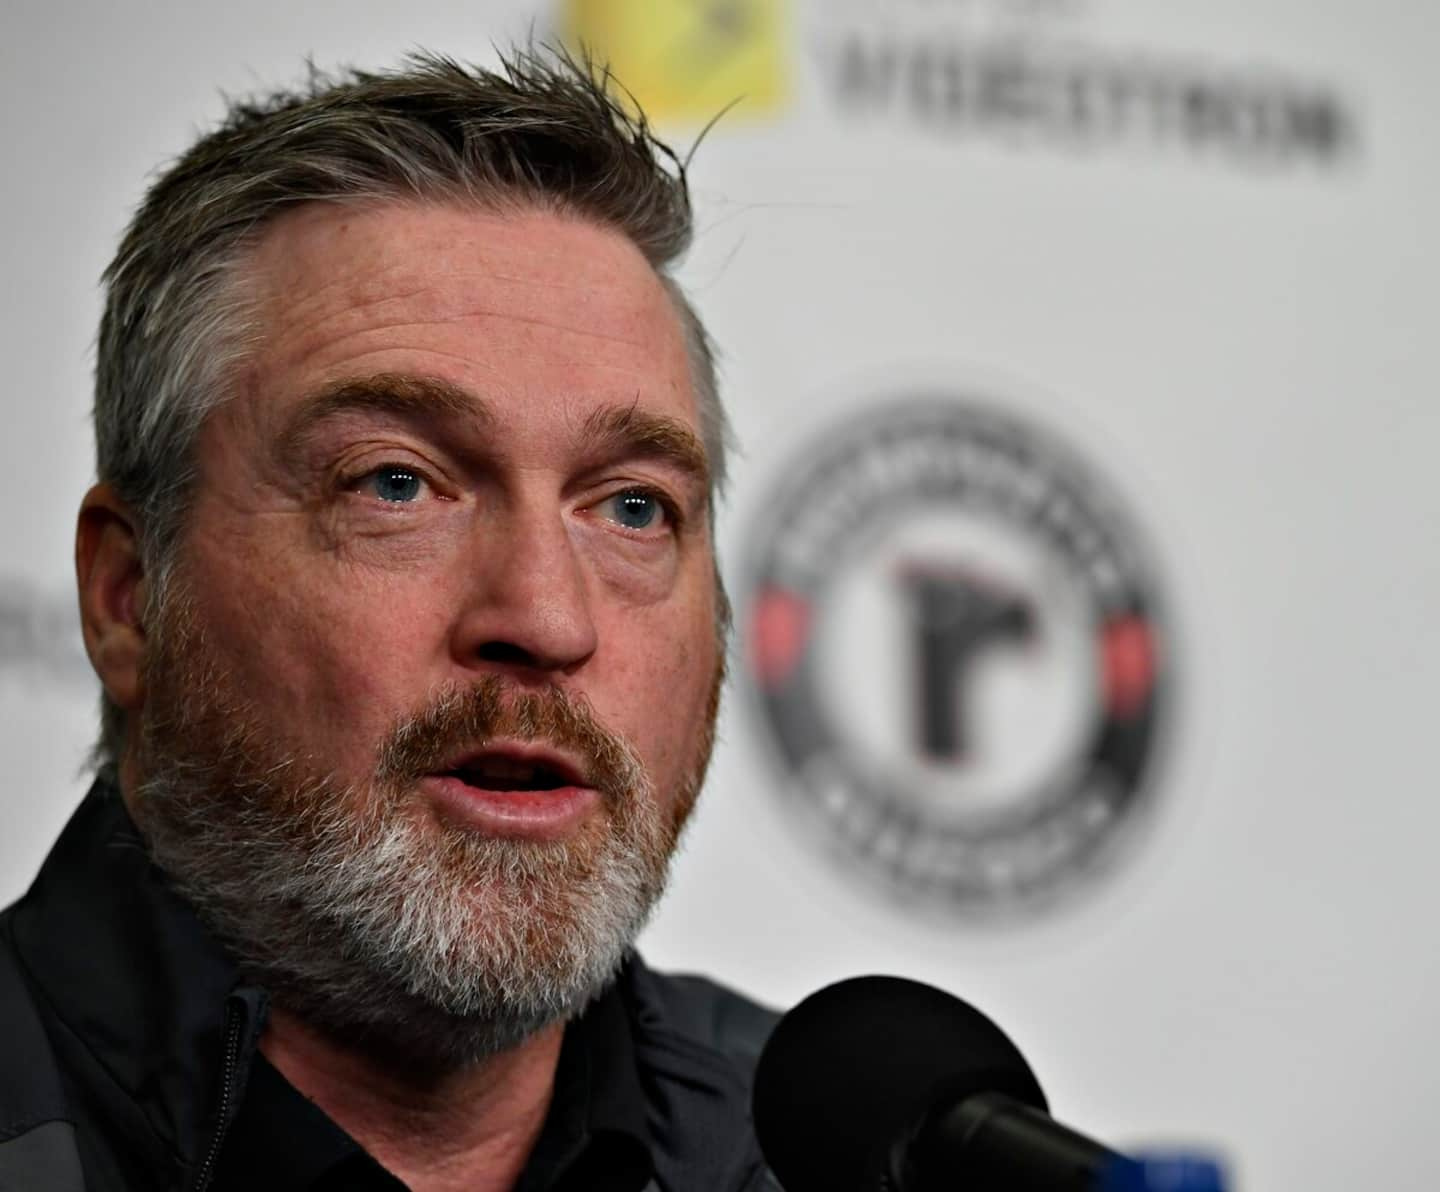 Patrick Roy will decide on his future this afternoon